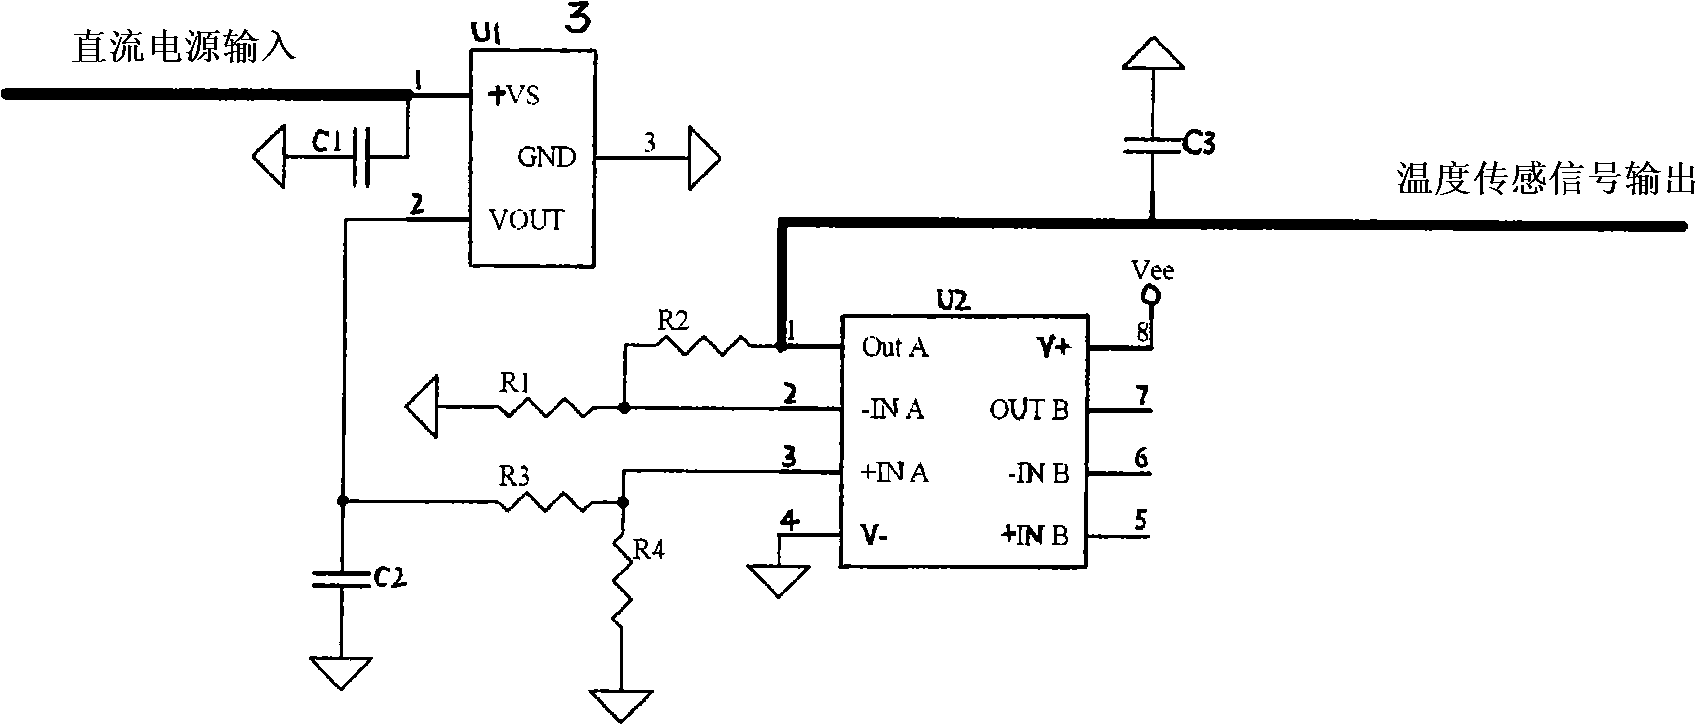 RSSI circuit of microwave outdoor unit